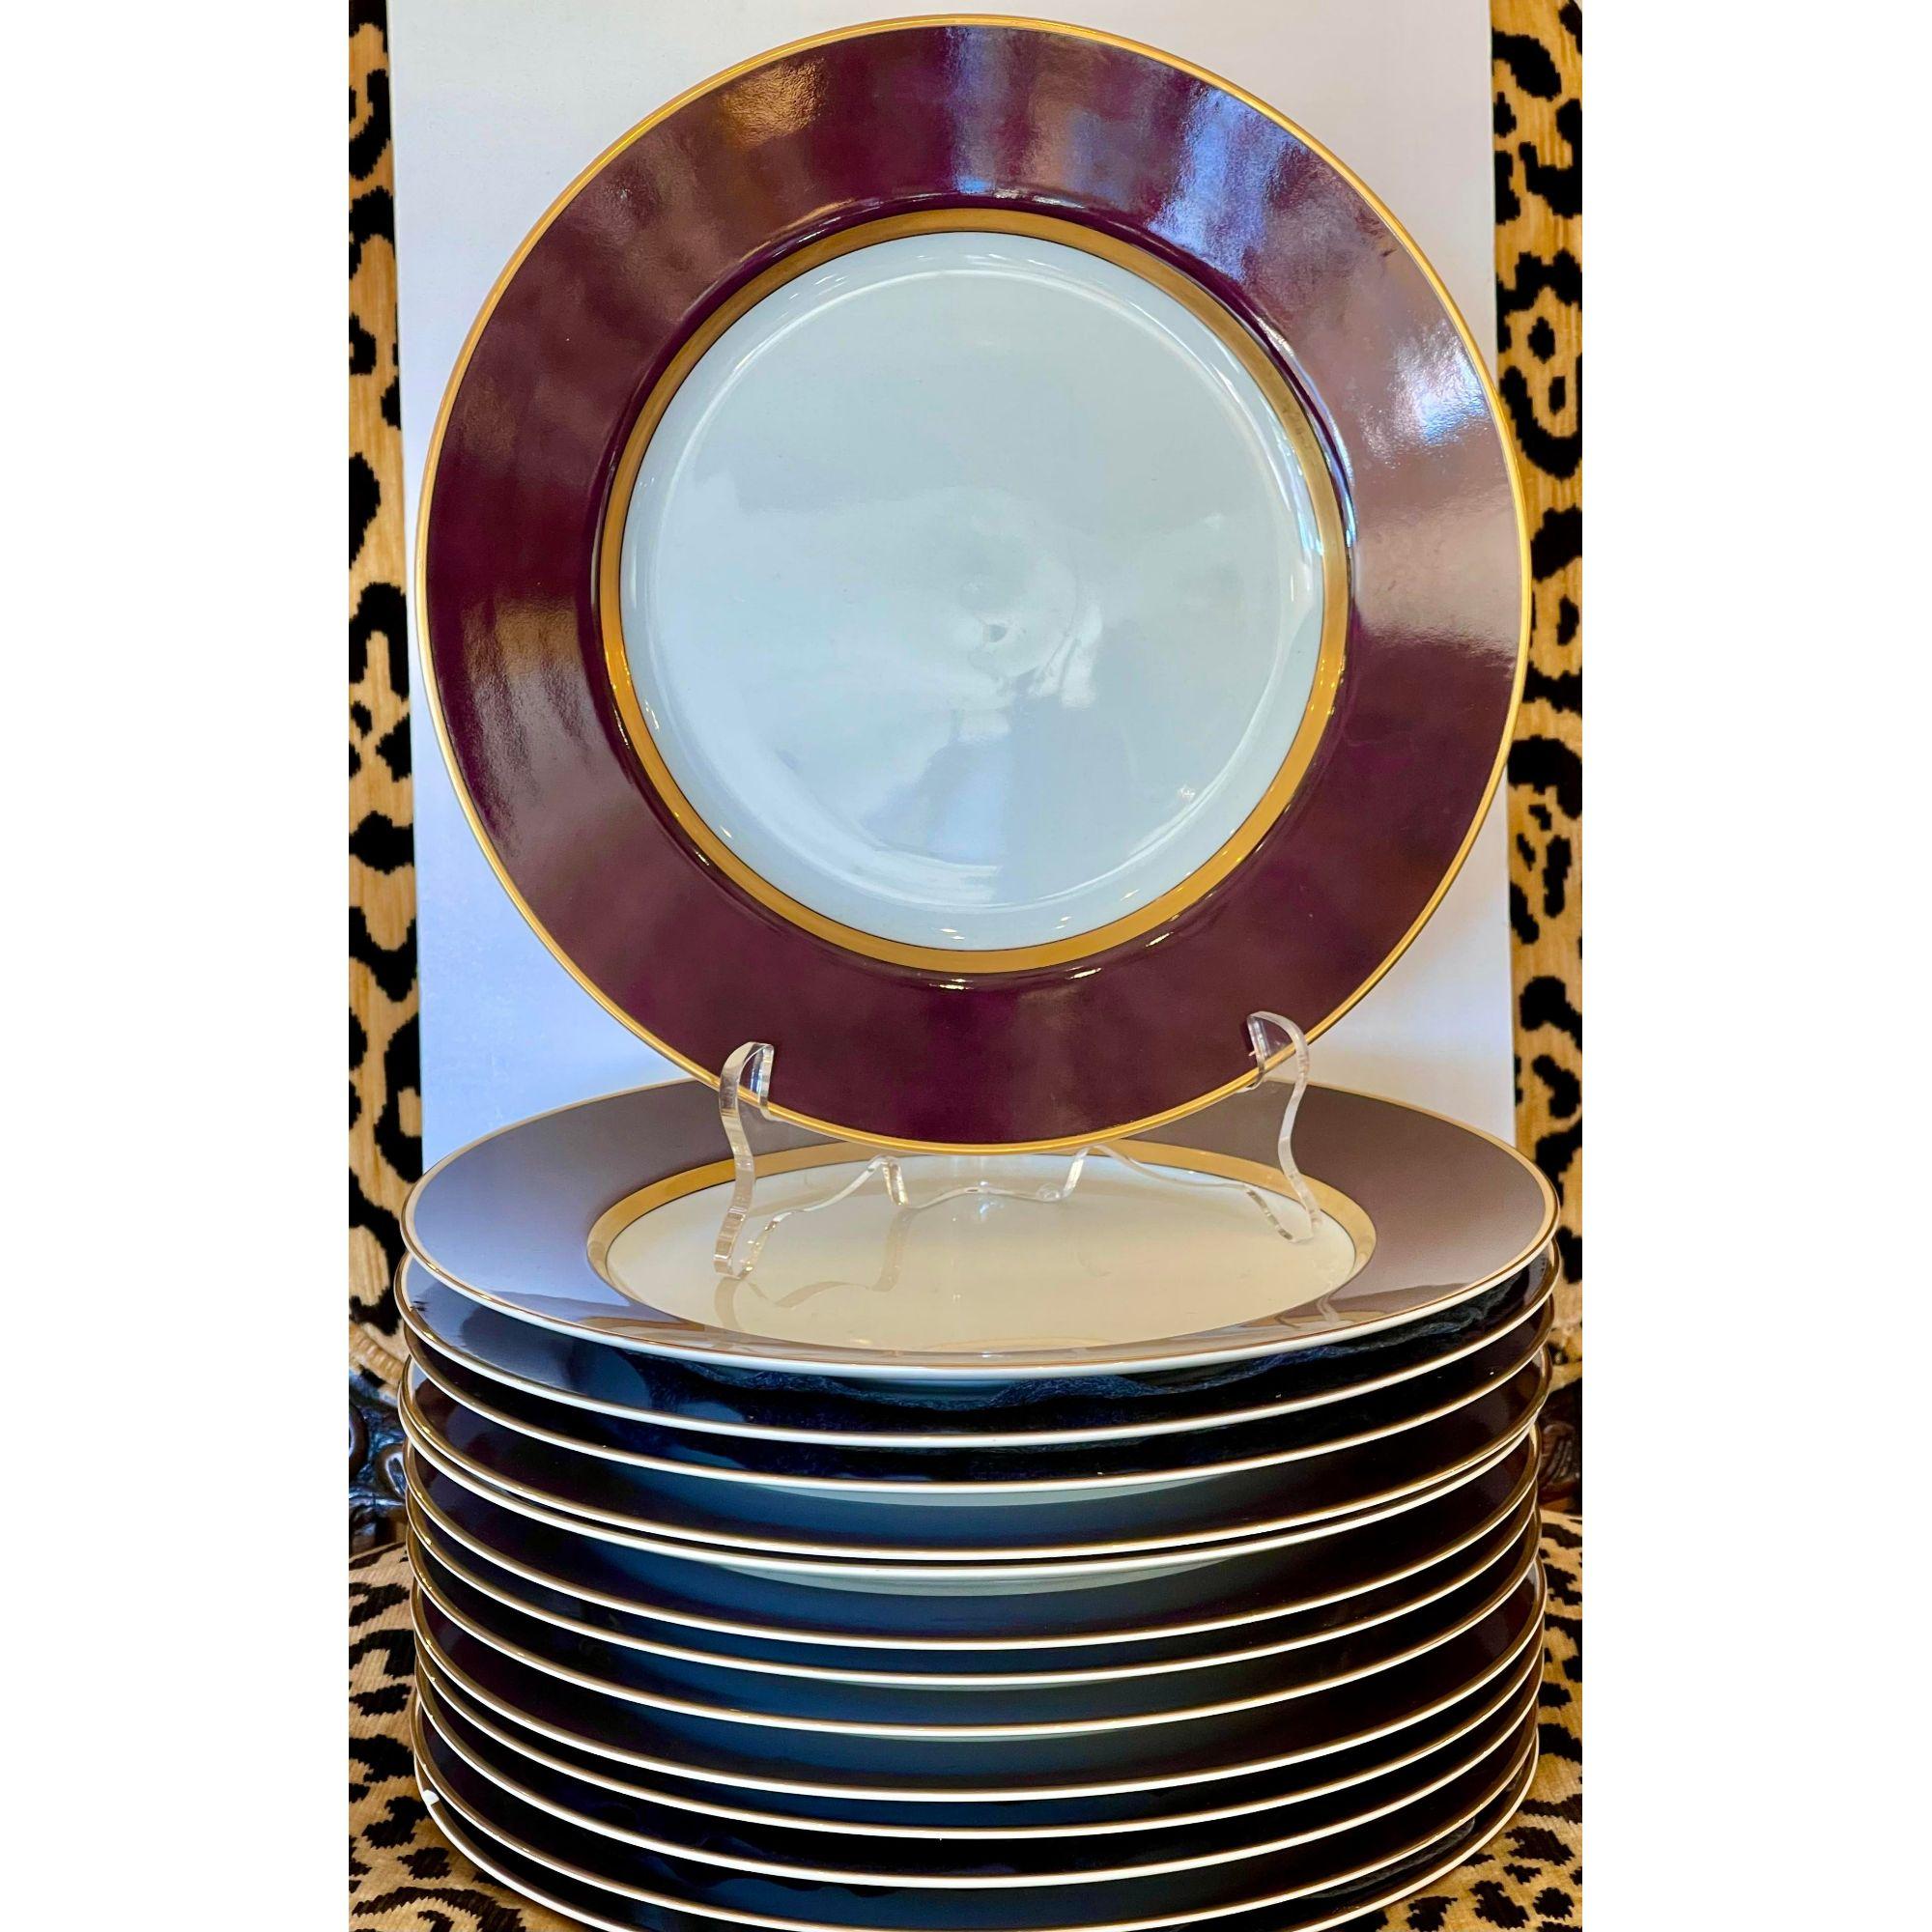 Set of 16 Modern Fitz & Floyd Renaissance Aubergine Charger service plates. Each features a purple / brown border, a color Fitz & Floyd calls Aubergine. The pattern is called Renaissance and they were rarely used and in excellent